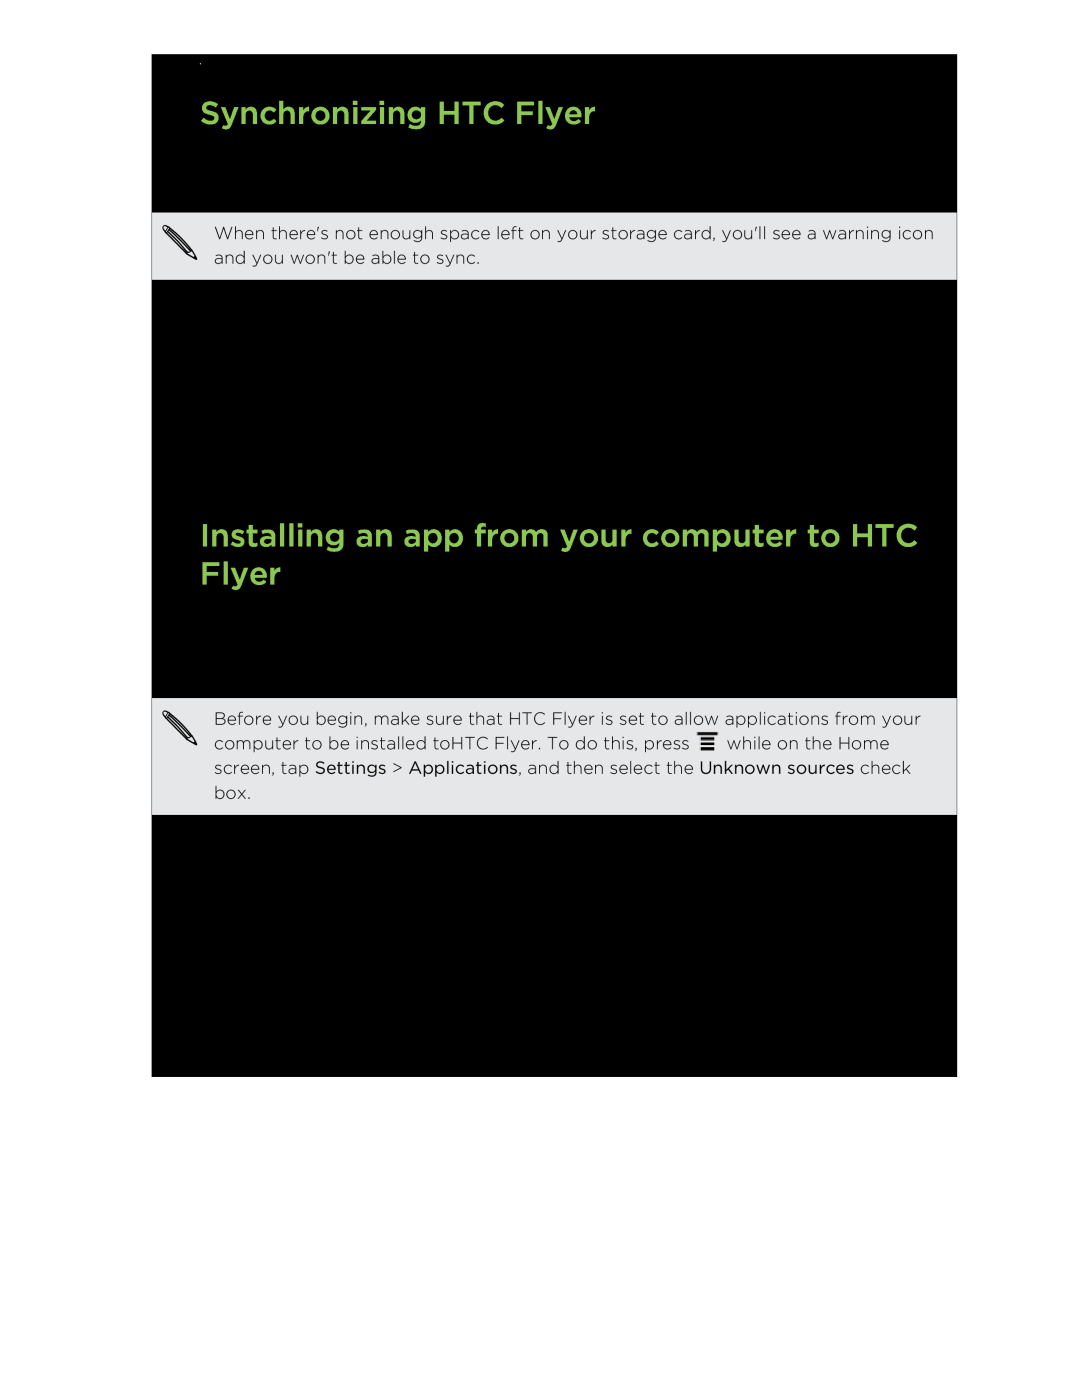 HTC HTCFlyerP512 manual Synchronizing HTC Flyer, Installing an app from your computer to HTC Flyer 